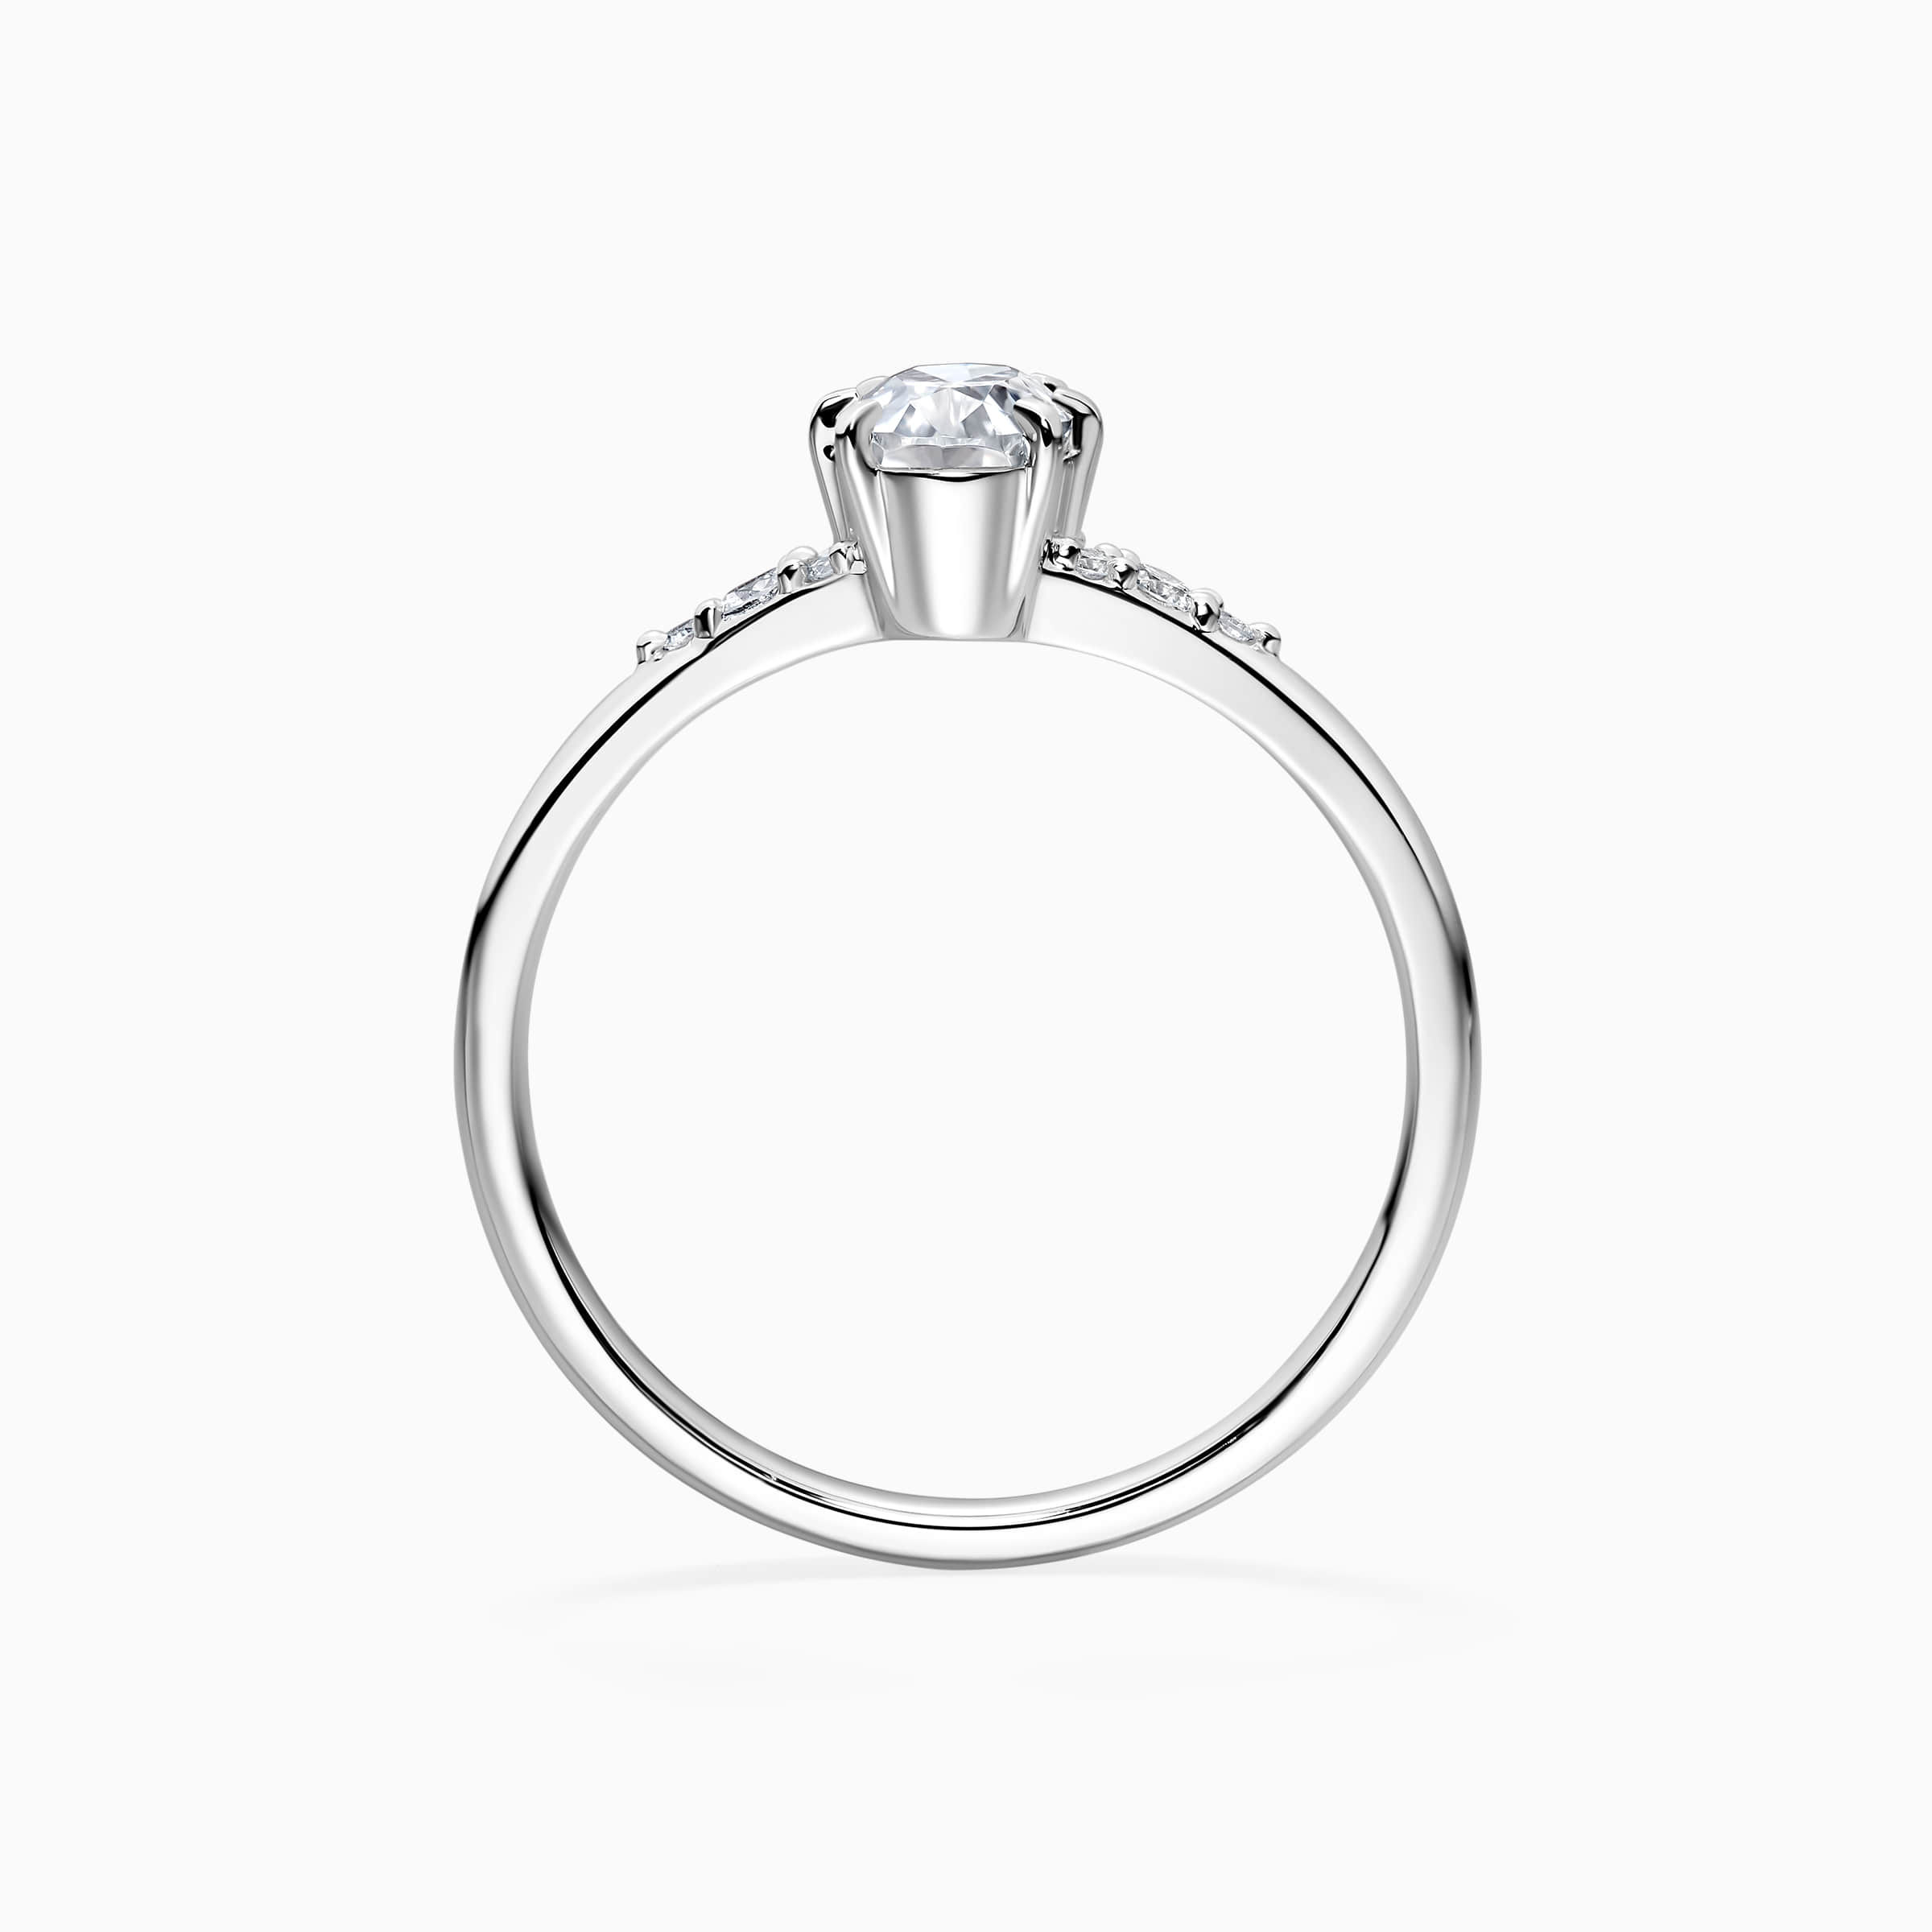 Darry Ring oval engagement ring front view